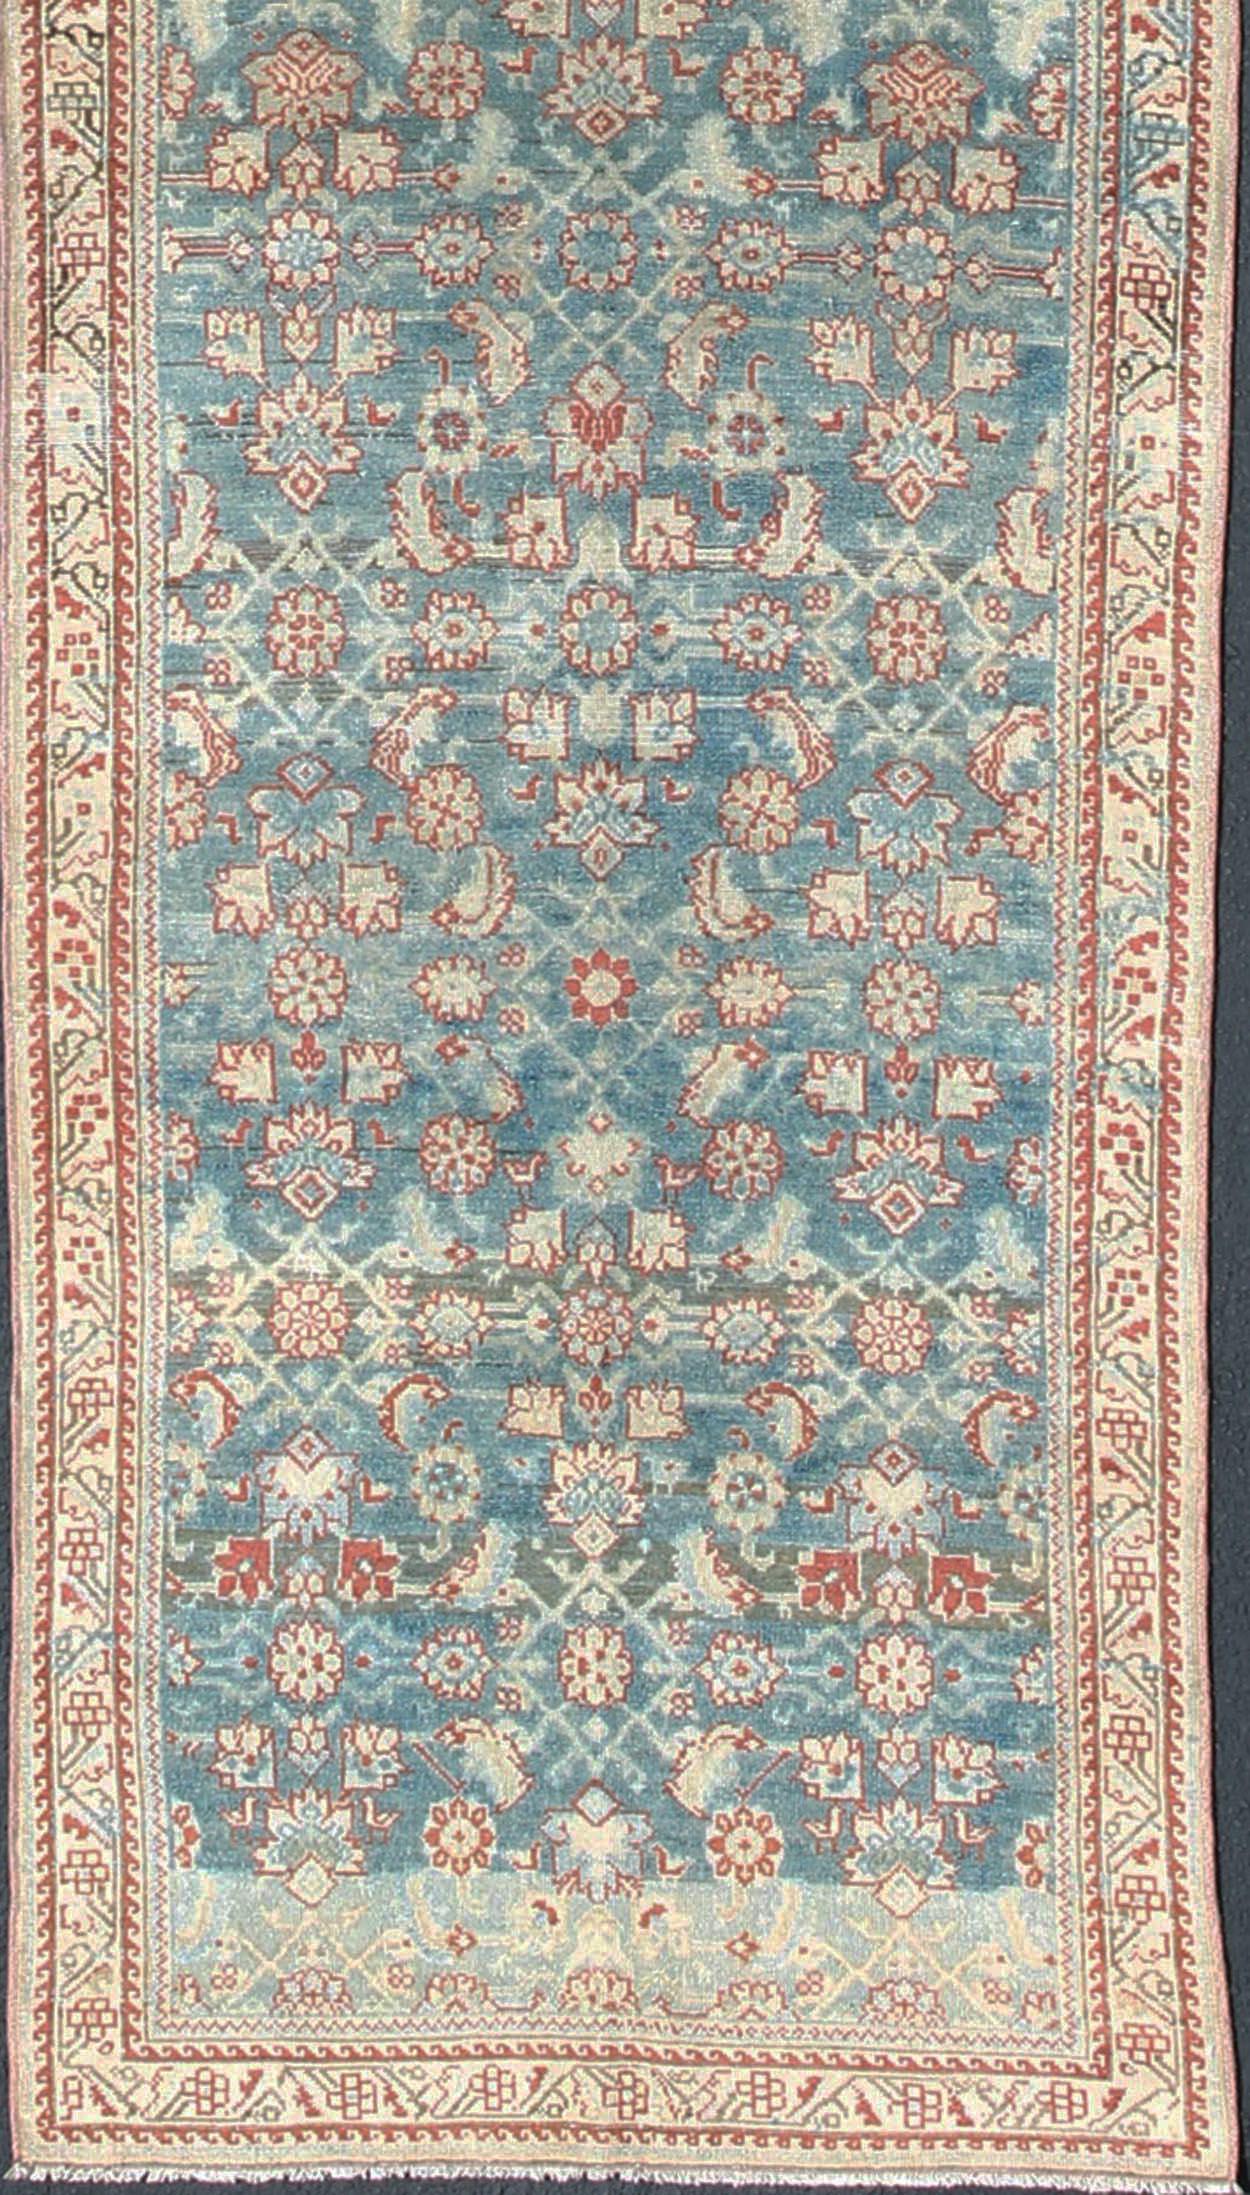 Floral design Persian antique Malayer runner in blue, red, nude tones, rug sus-1807-265, country of origin / type: Iran / Malayer, circa 1920

This antique Persian Malayer runner, circa early 20th century, relies heavily on exquisite details as well